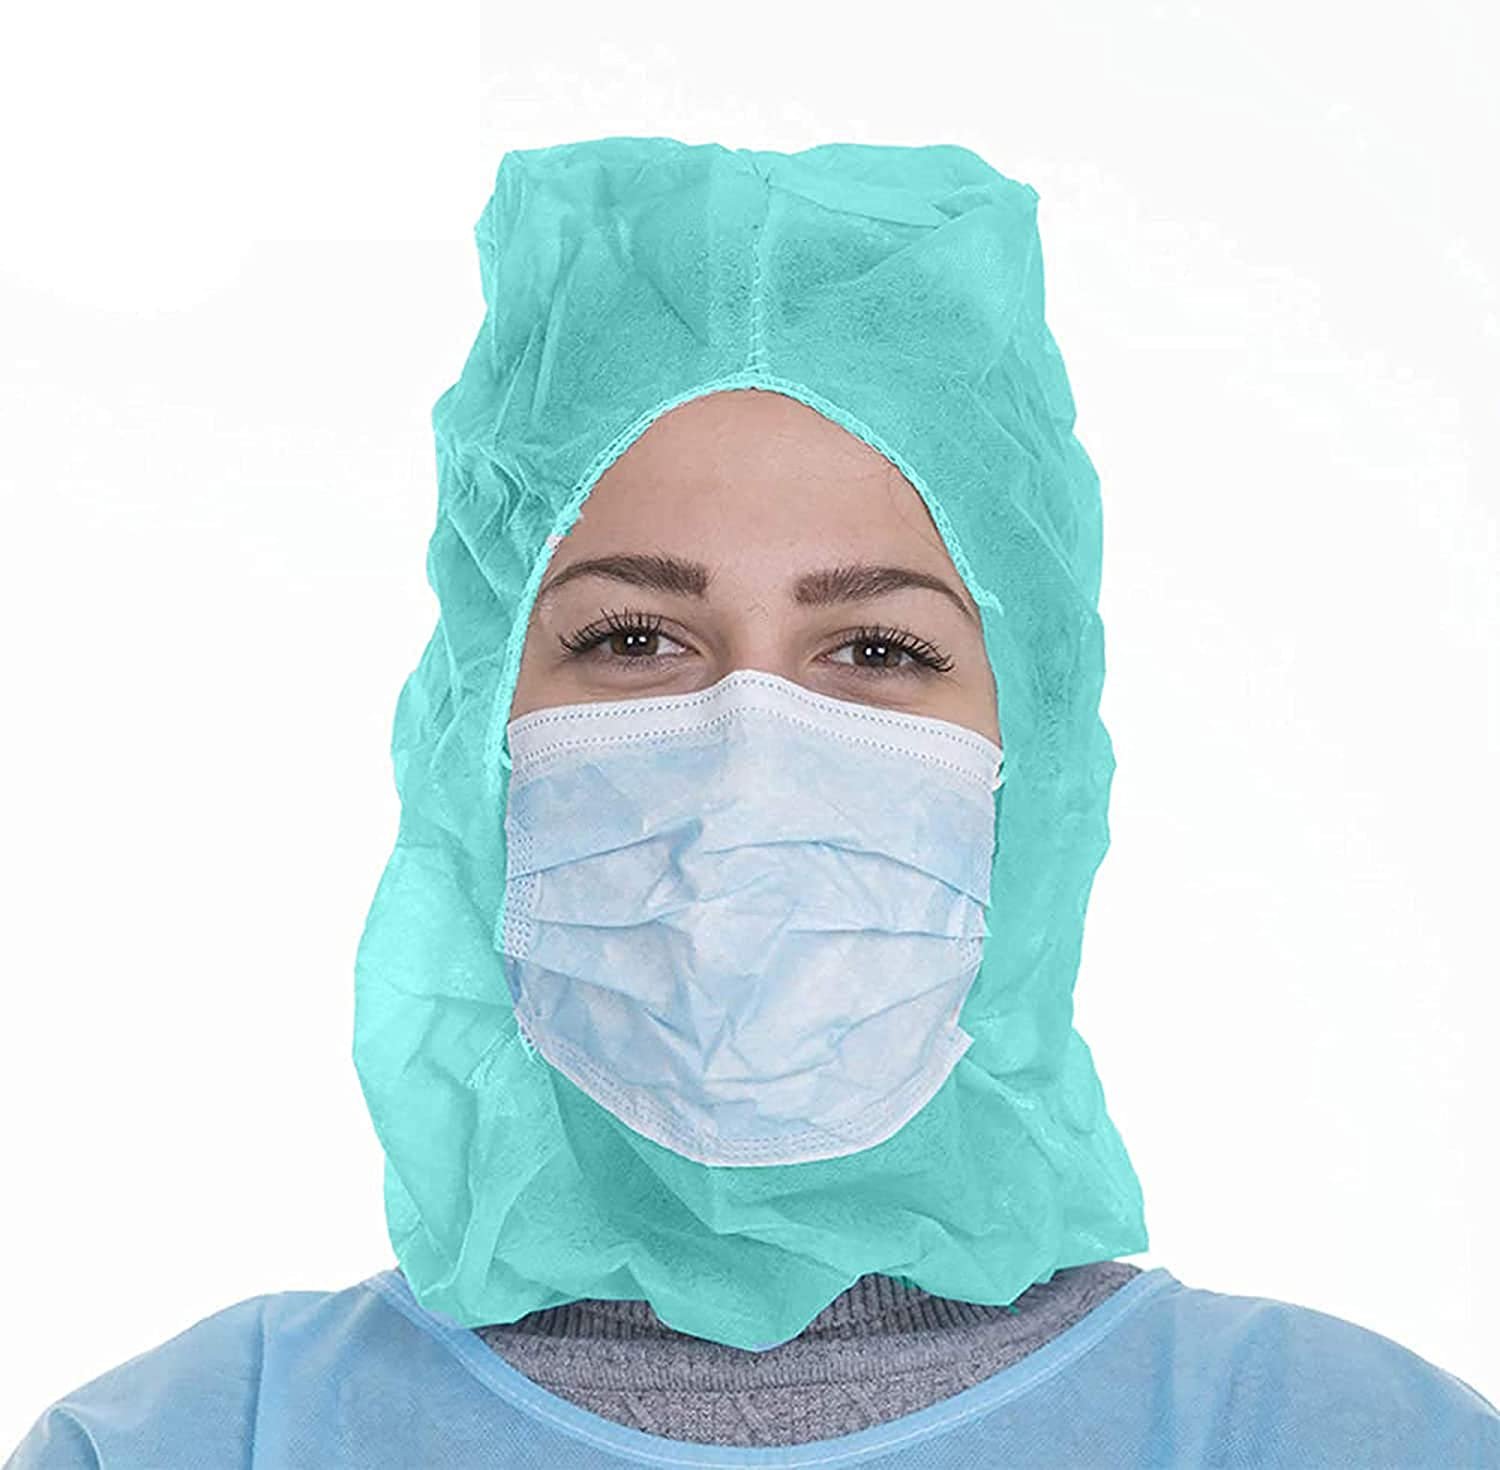 AMZ Supply Disposable Protective Hoods Teal Polypropylene 18 gsm Hooded Caps Universal Size PPE Pack of 1000 - image 1 of 1